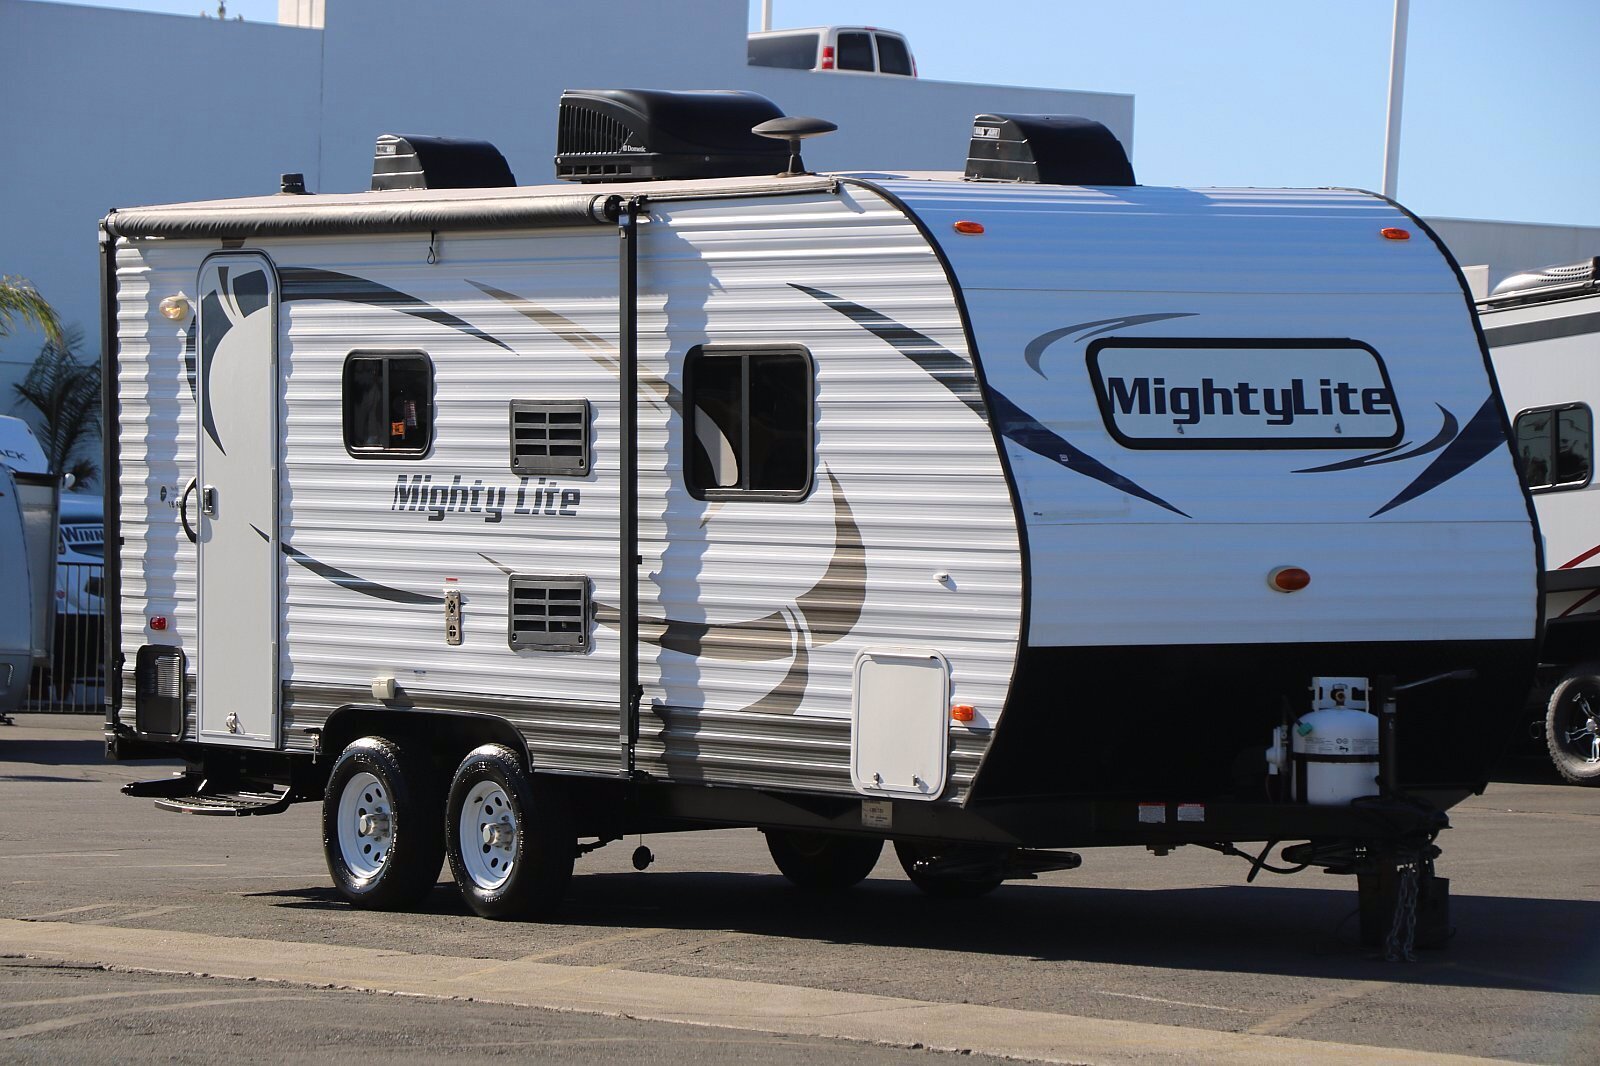 2015 PACIFIC COACHWORKS MIGHTY LITE 18RBS